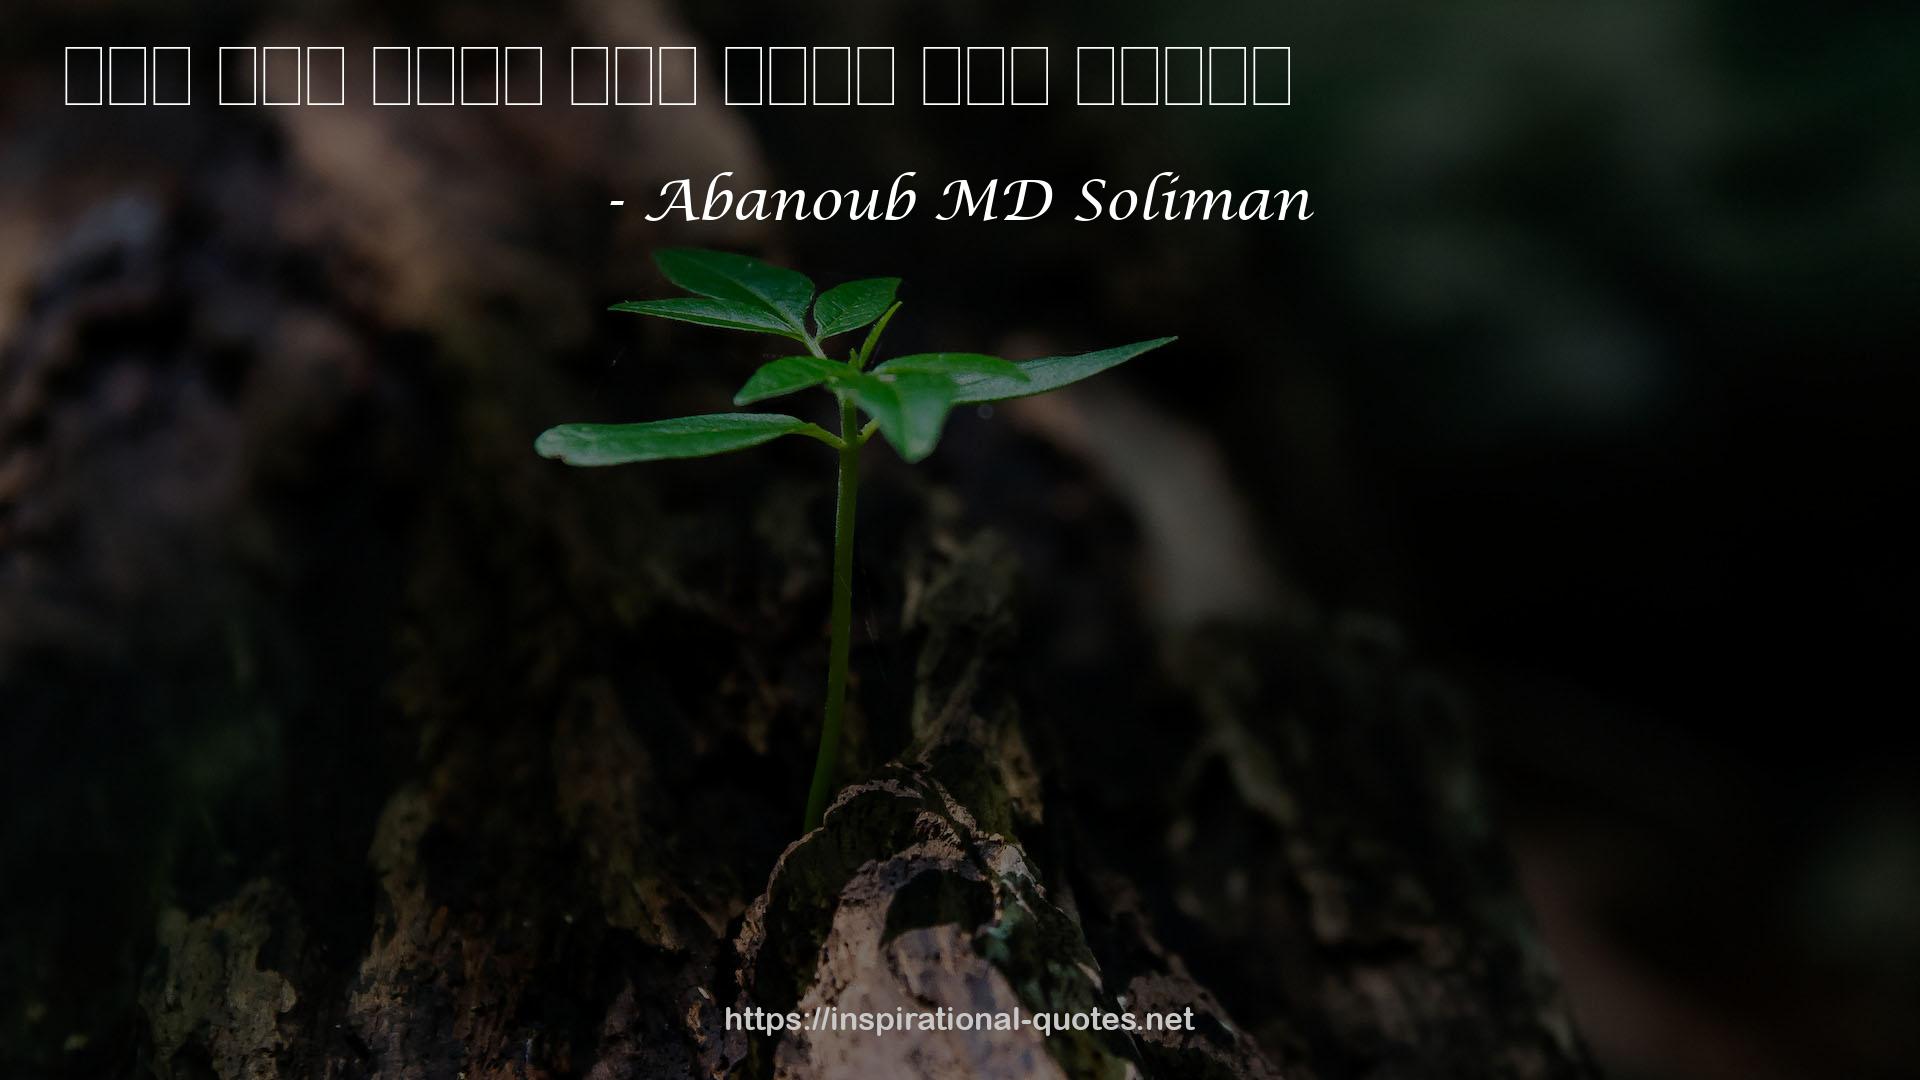 Abanoub MD Soliman QUOTES